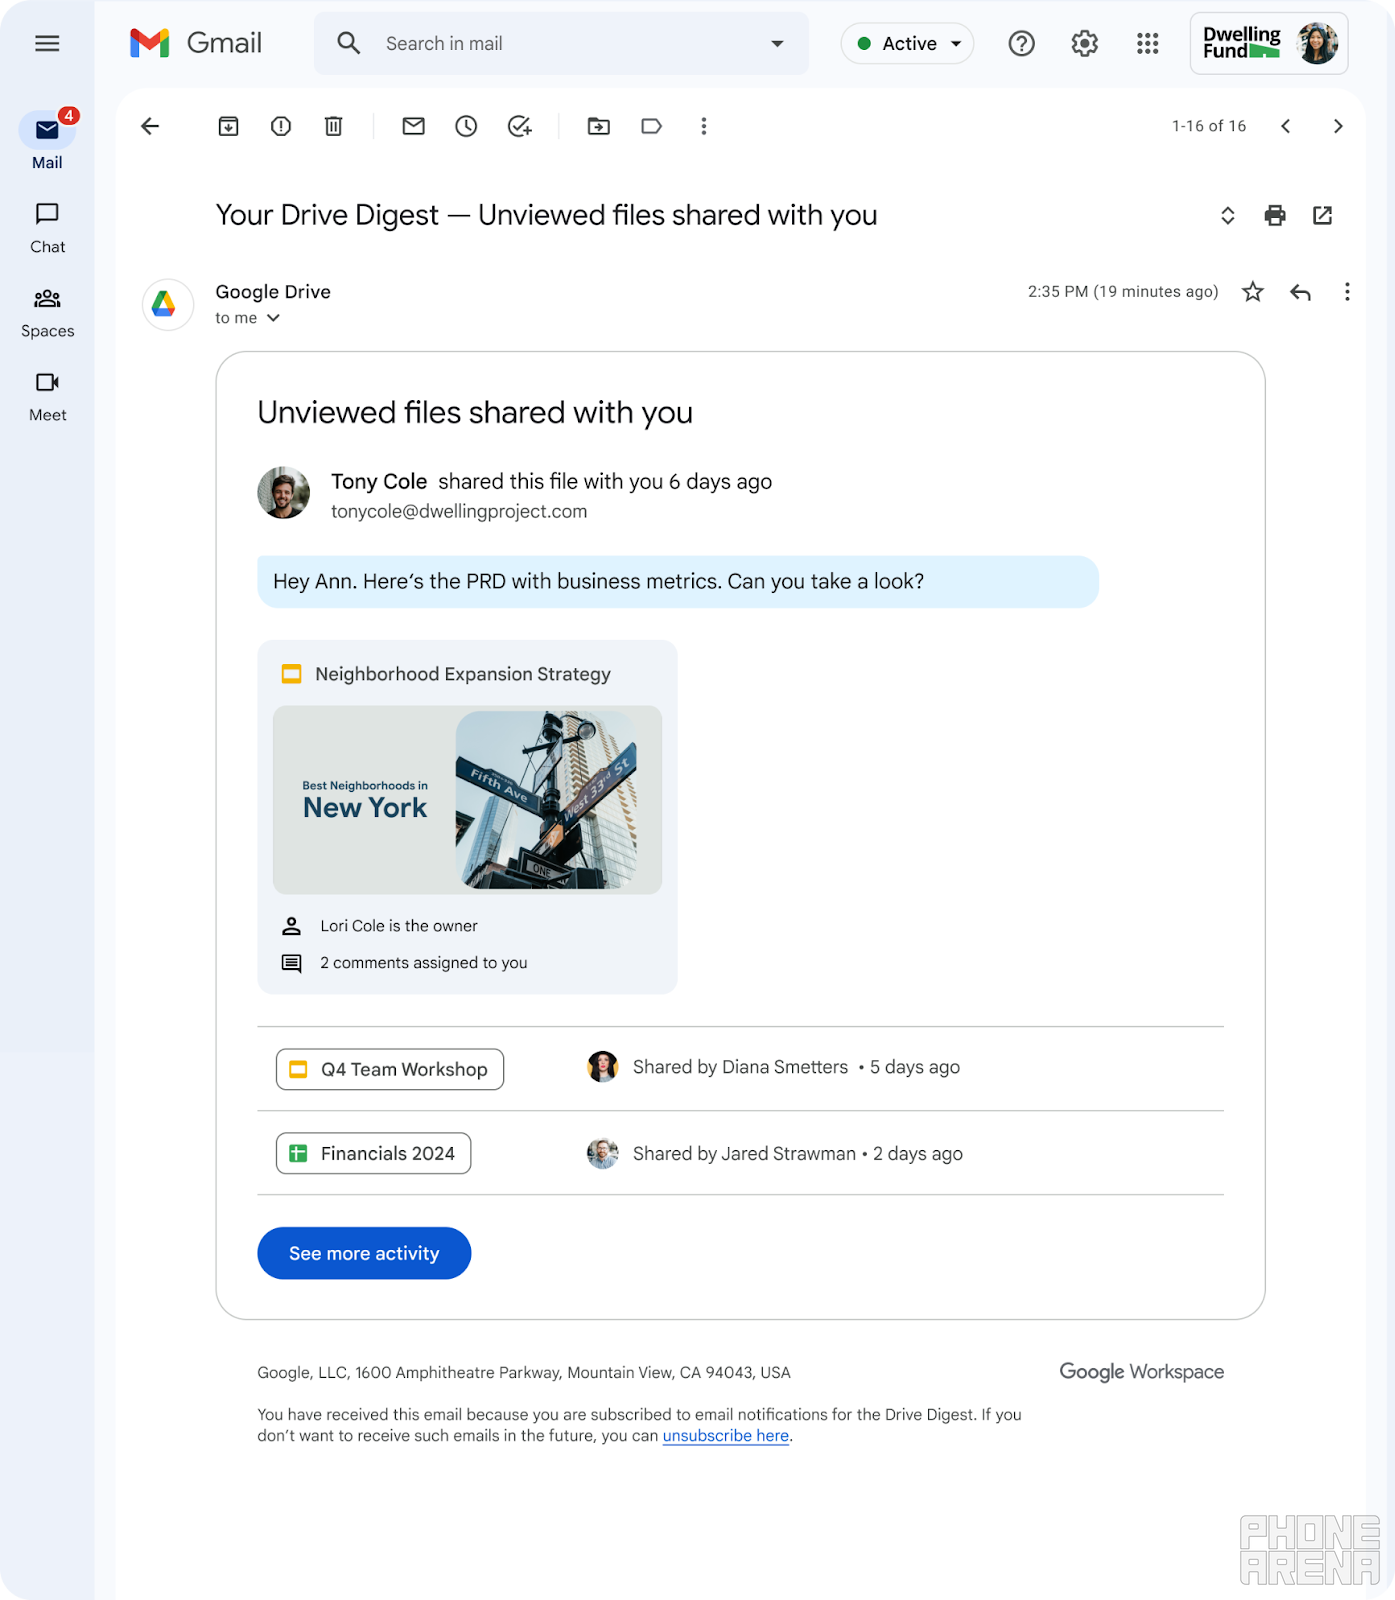 Image Source - Google - Google Drive introduces automatic digest emails so you stay on top of files and activity